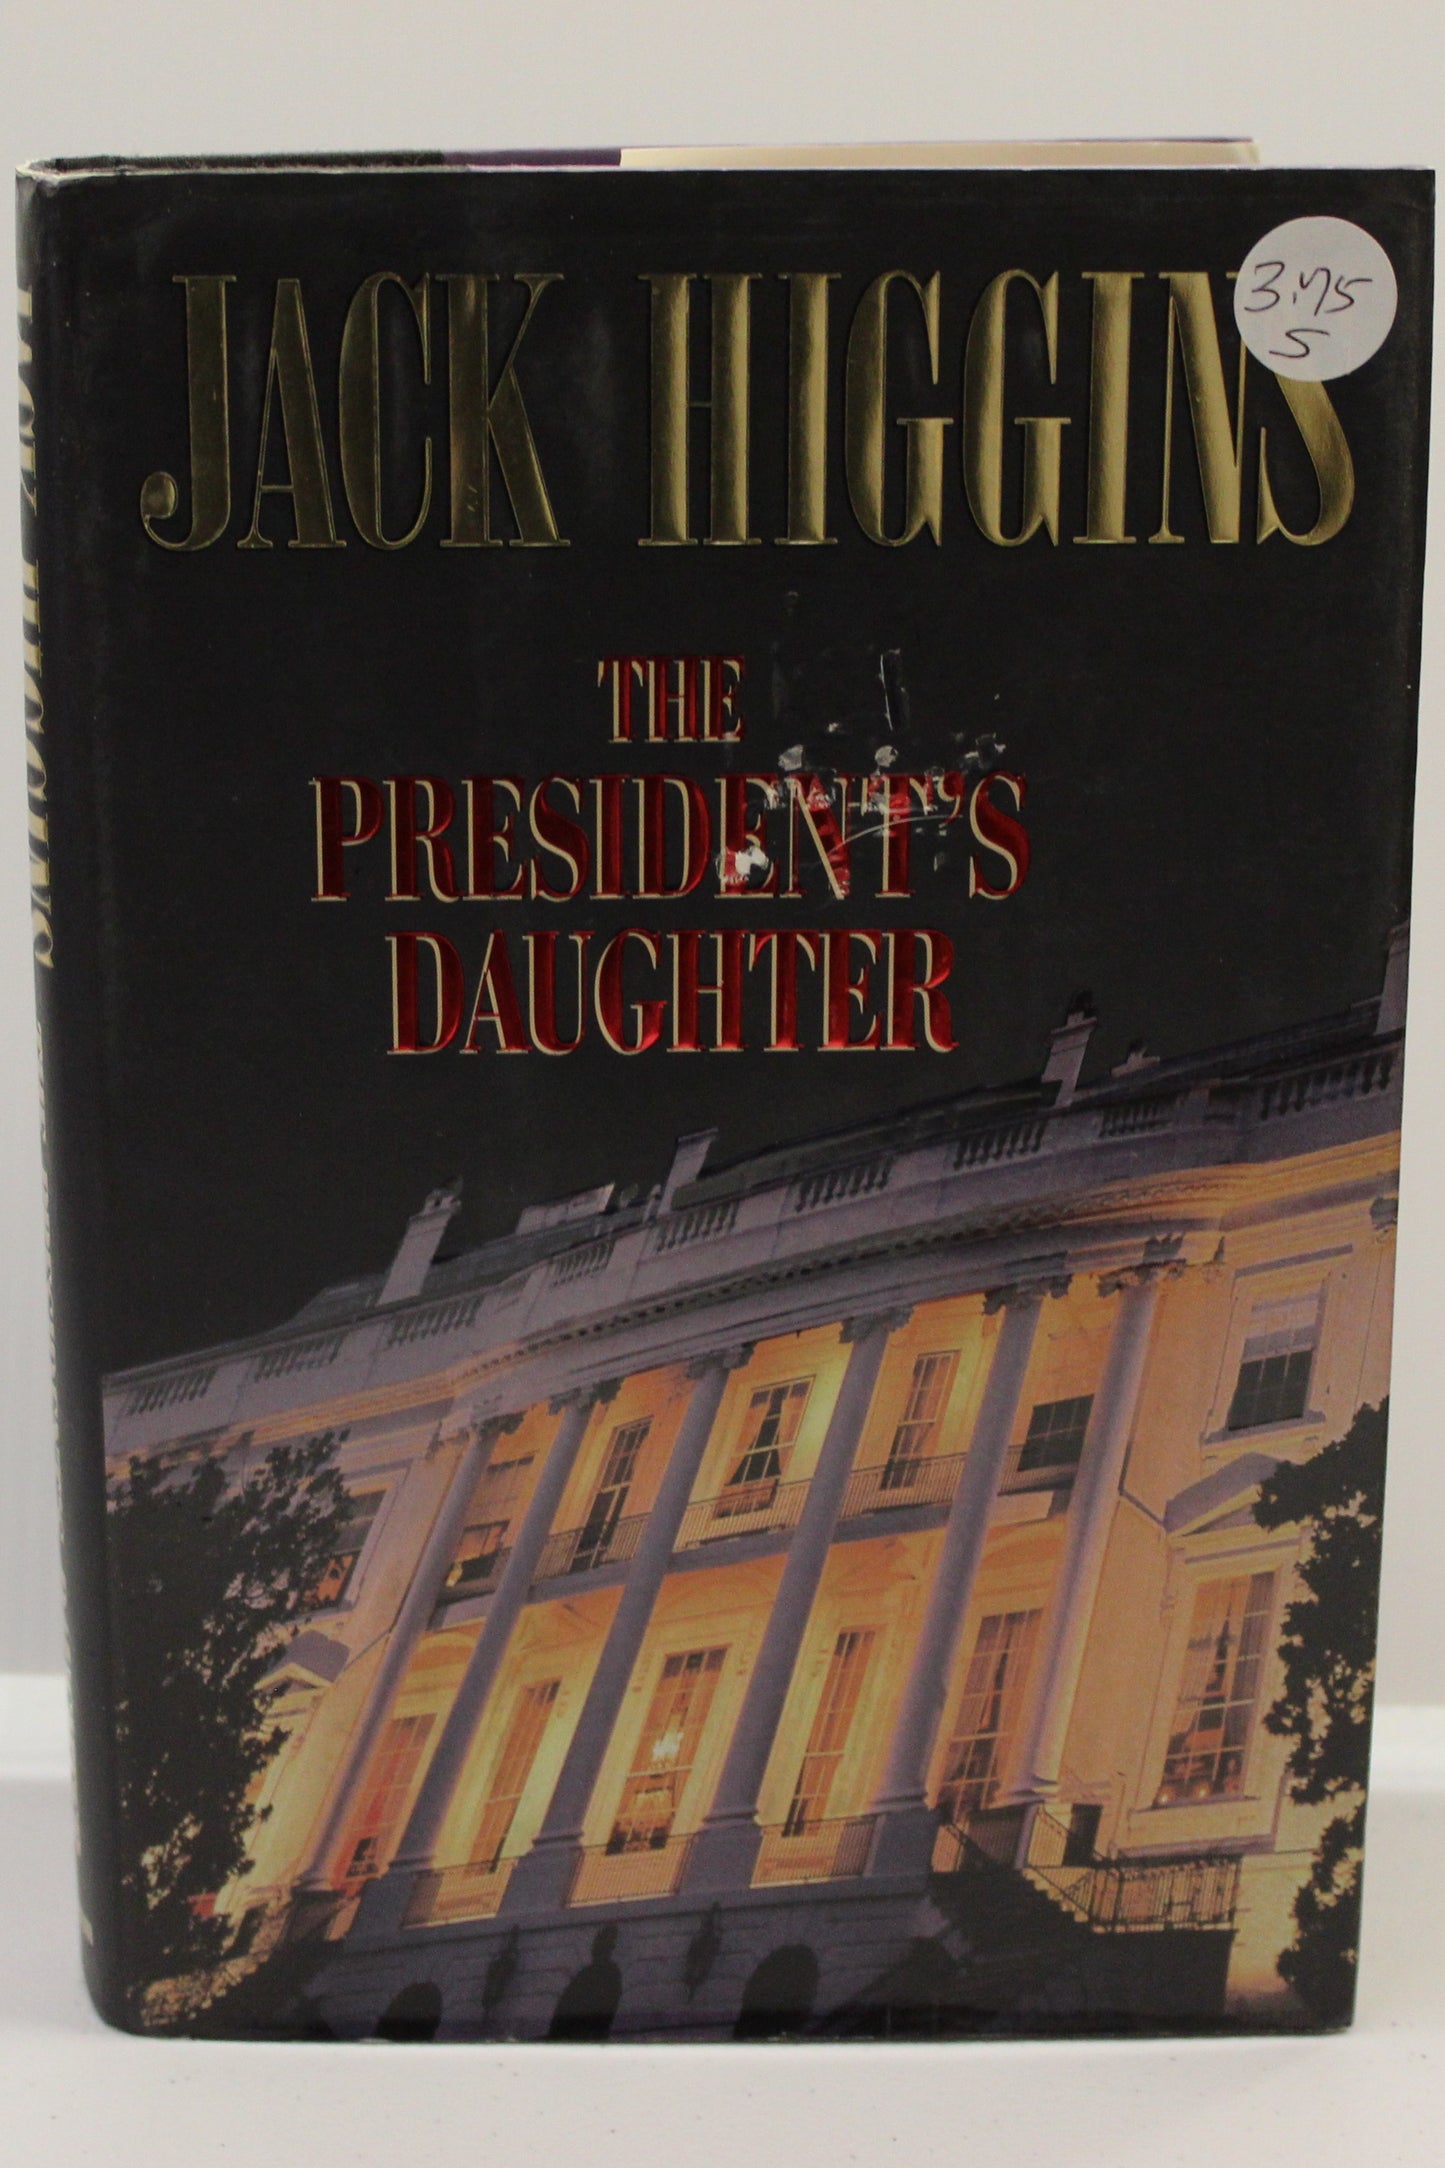 THE PRESIDENT'S DAUGHTER